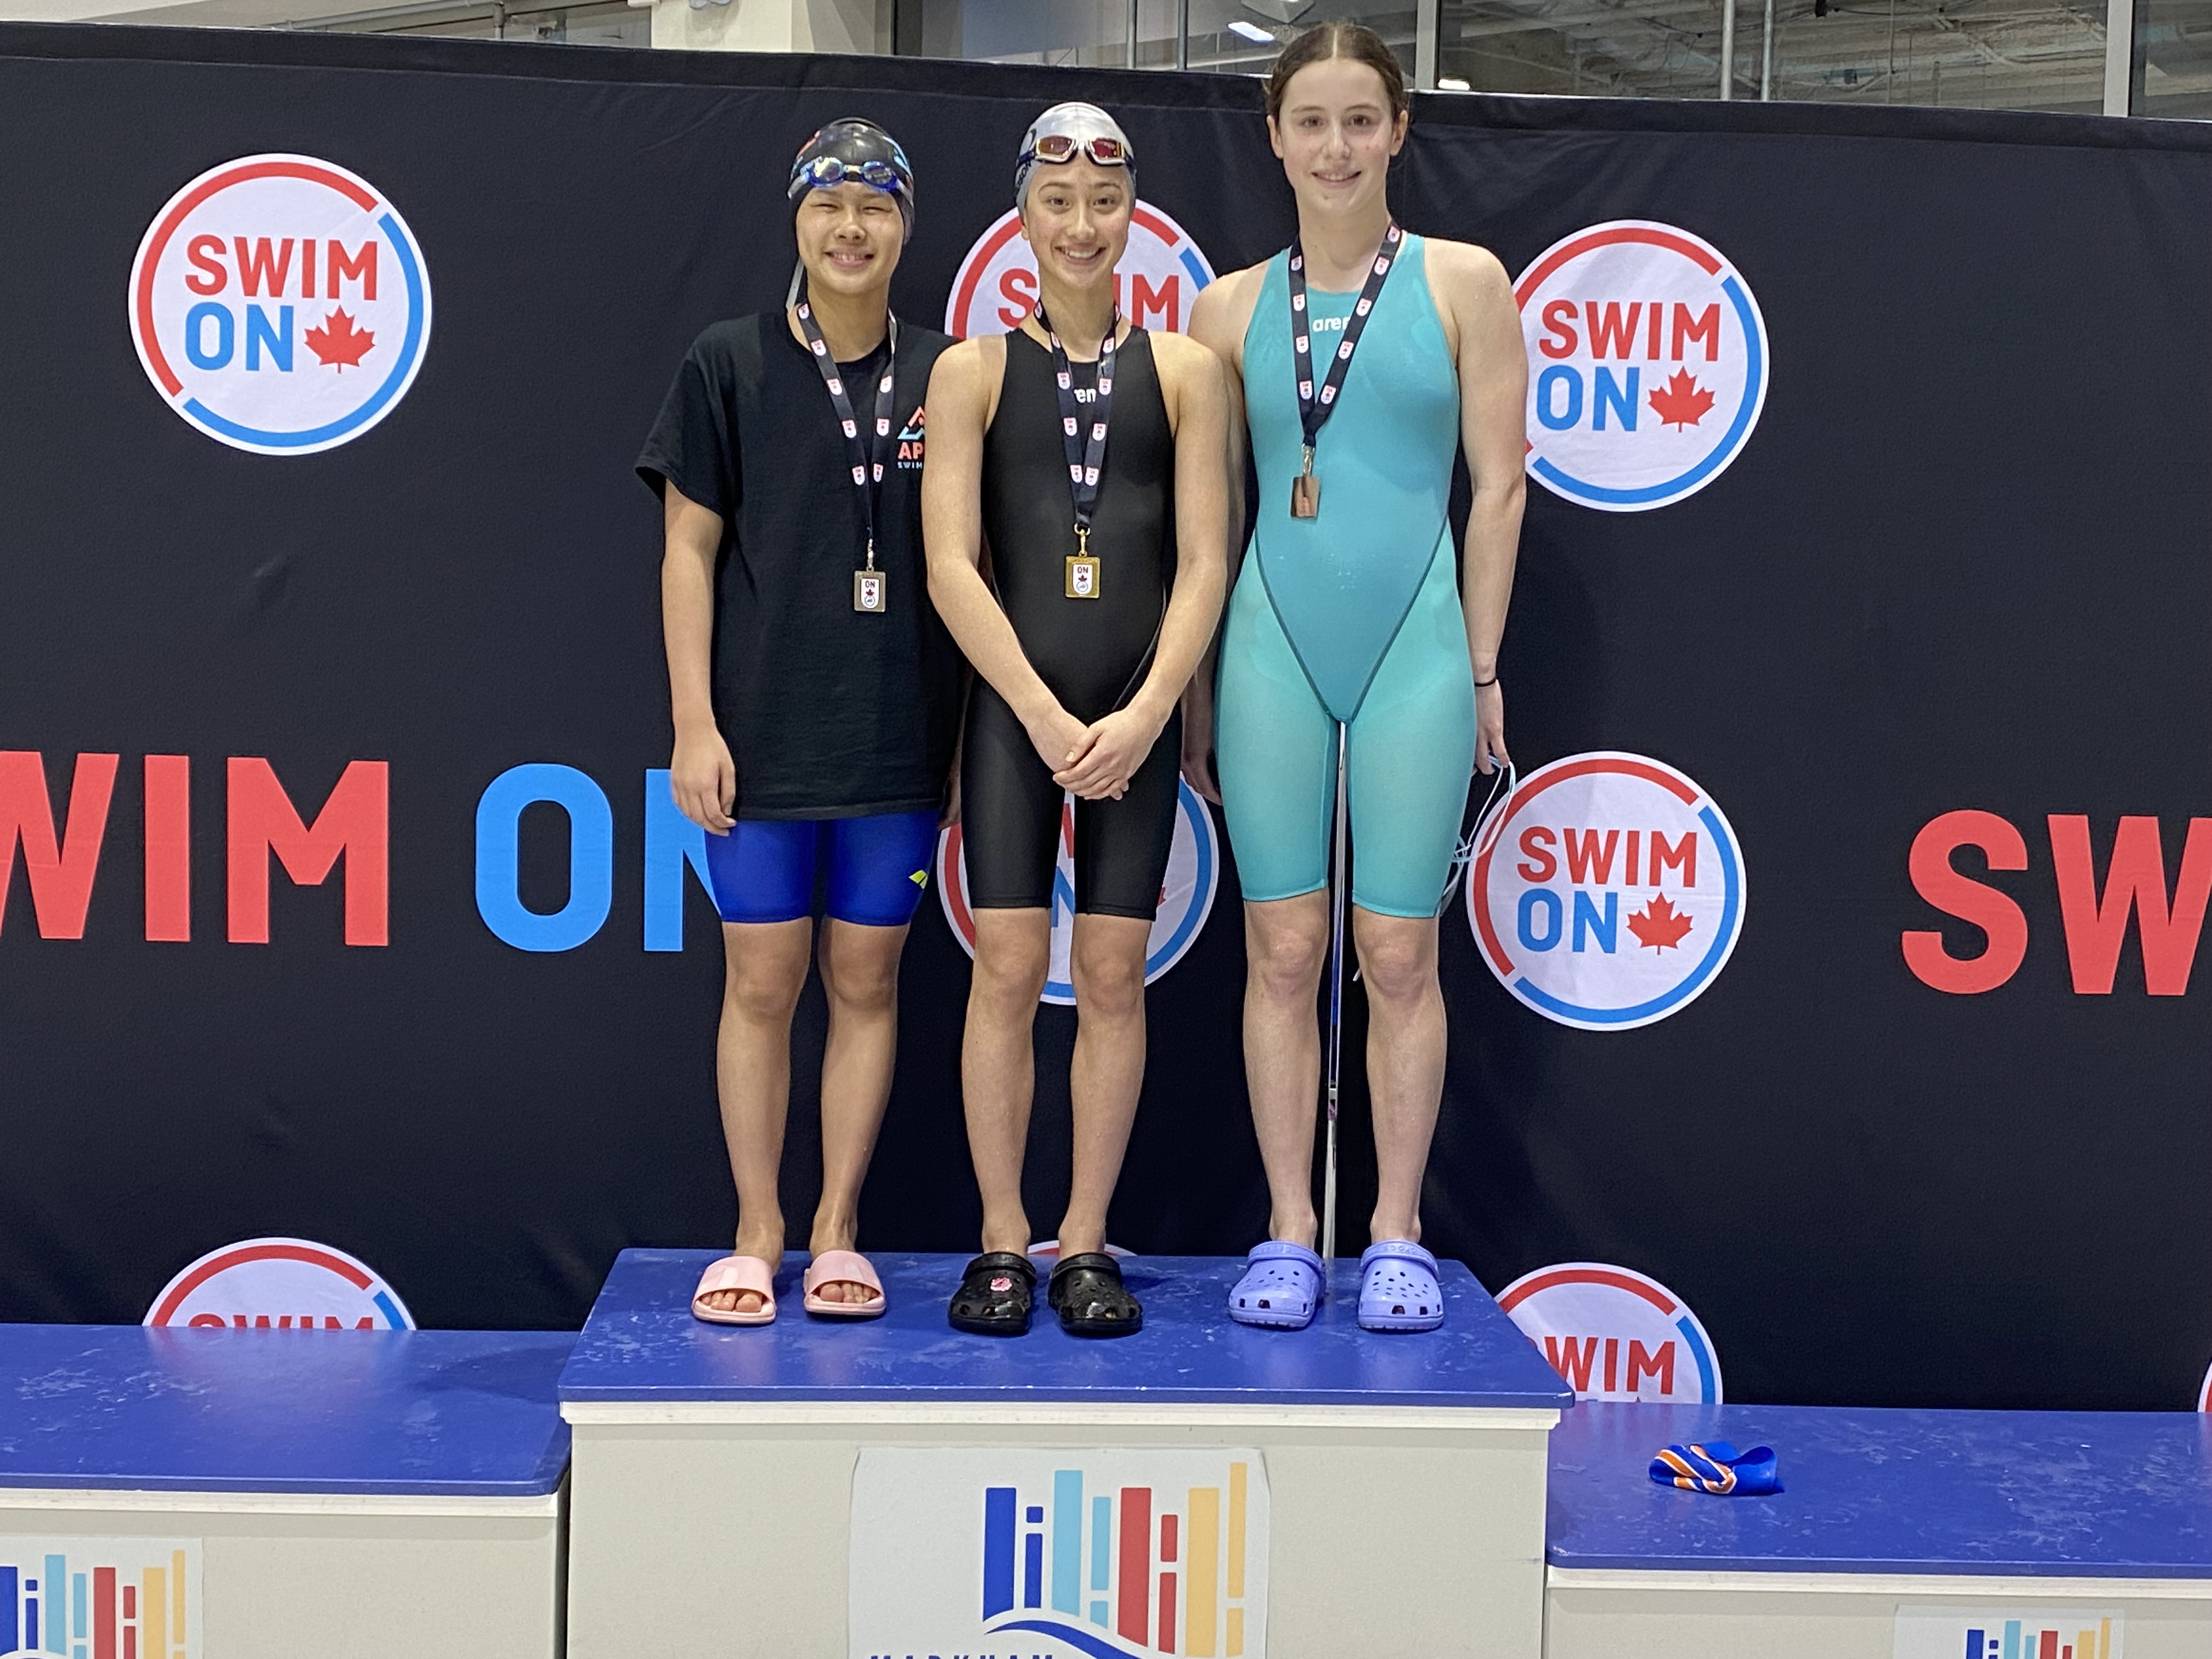 Gold for Jordyn in the 200 IM at OYJ's!